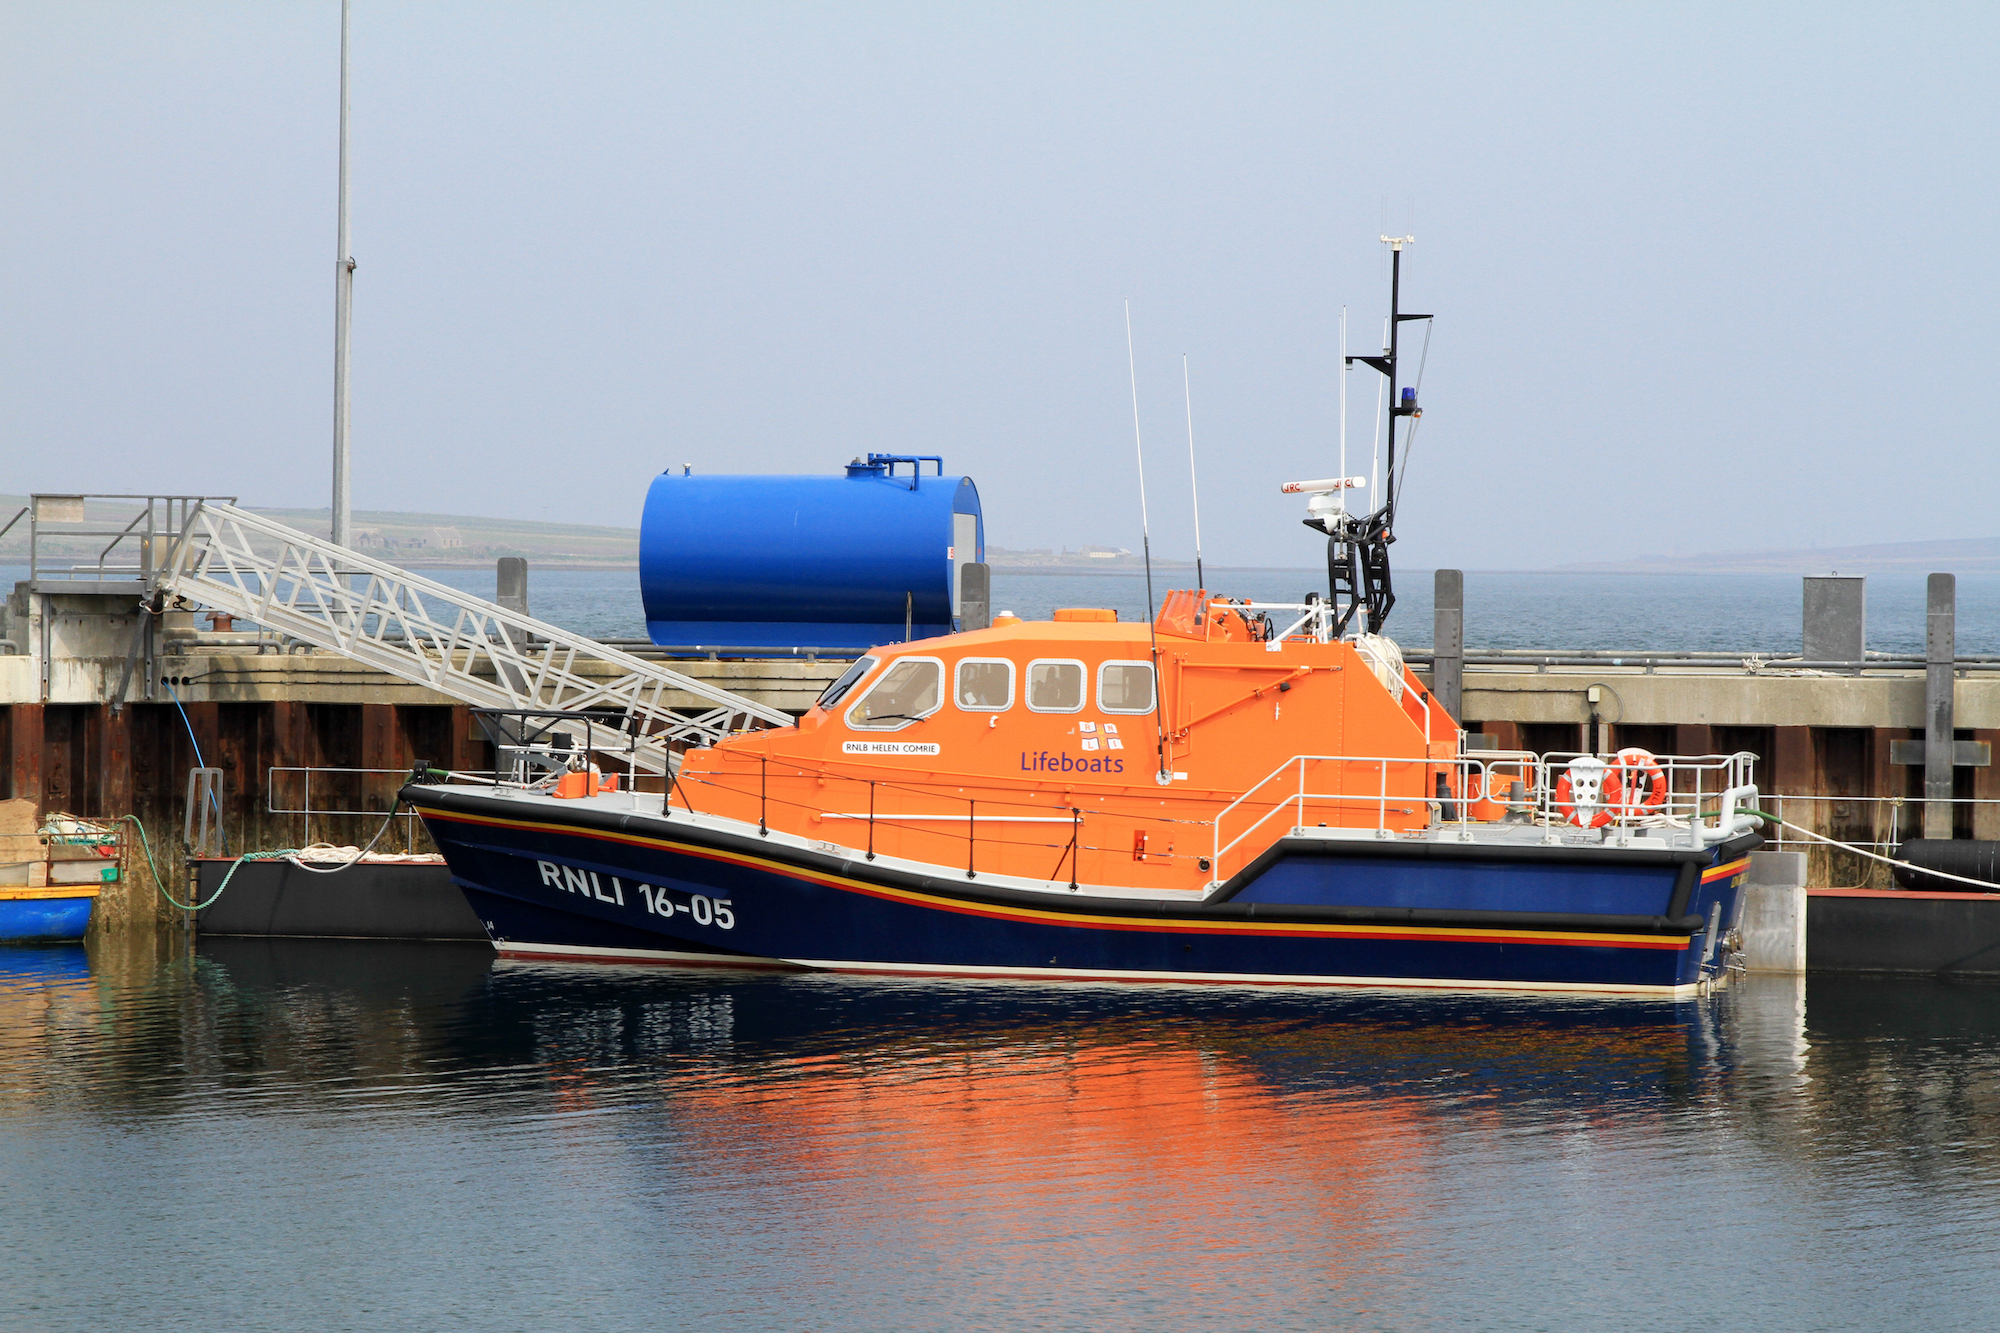 Longhope lifeboat called to assist creel boat - The Orcadian Online